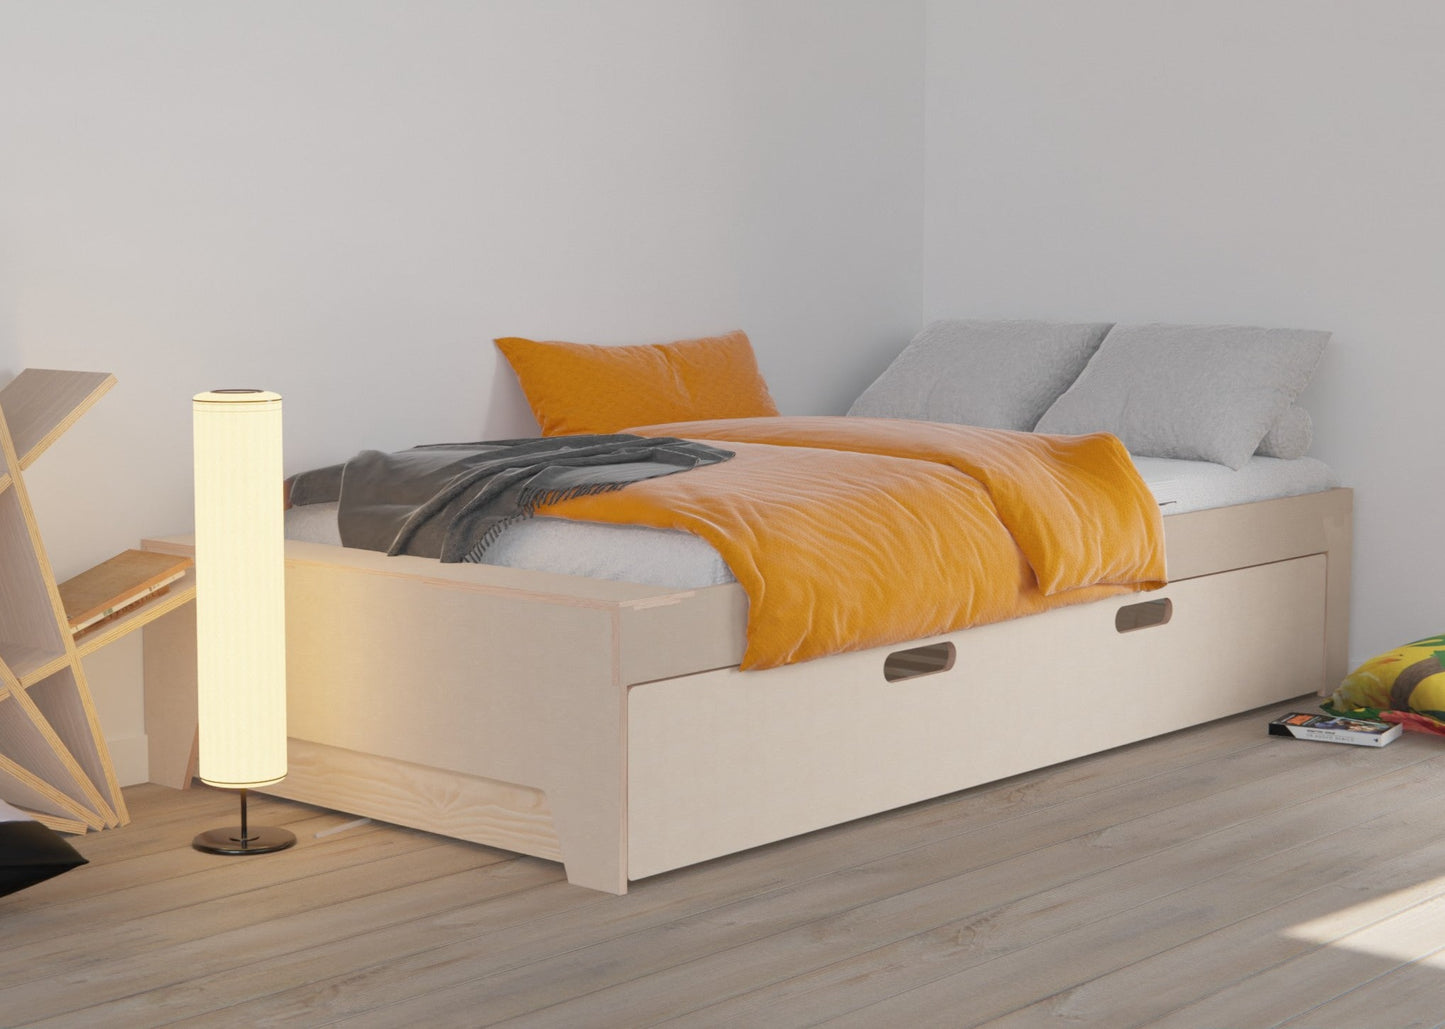 Versatile wooden bed frame with trundle bed, ideal for a cozy and functional bedroom. A space-saving solution you'll love.